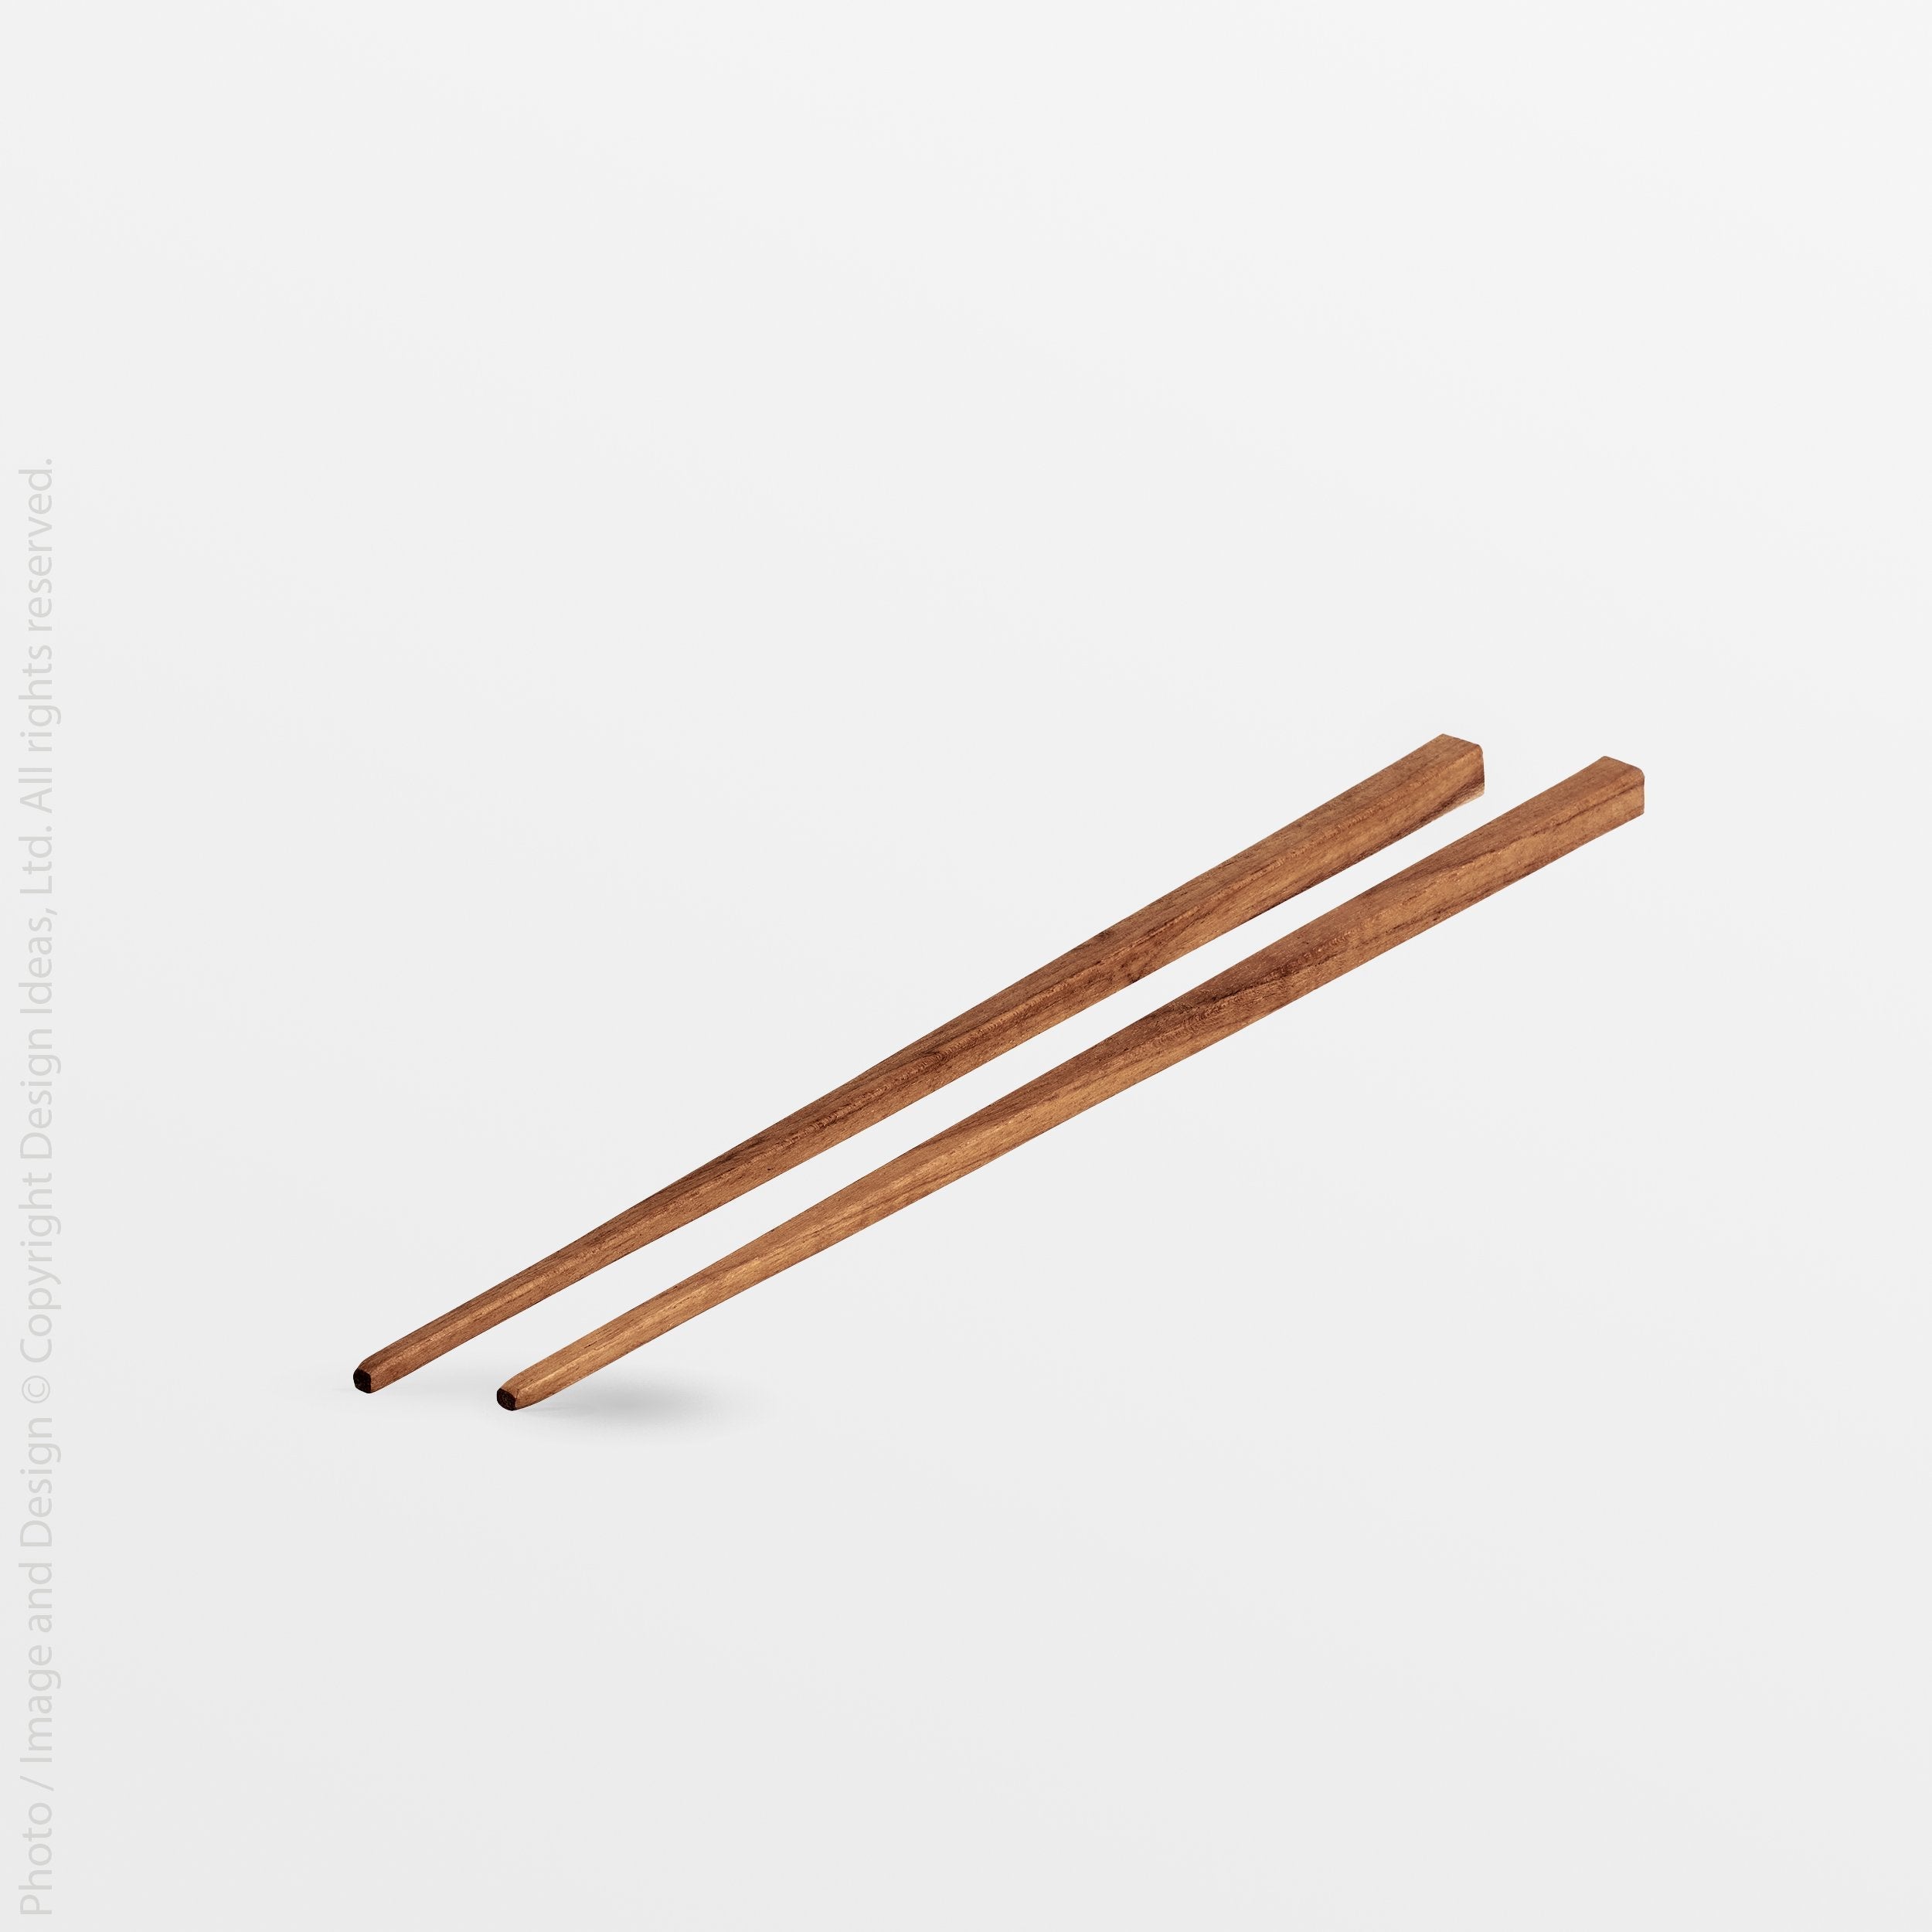 Chiku Teak Chopsticks - Black Color | Image 1 | From the Chiku Collection | Masterfully assembled with natural teak for long lasting use | These utensils are sustainably sourced | Available in natural color | texxture home